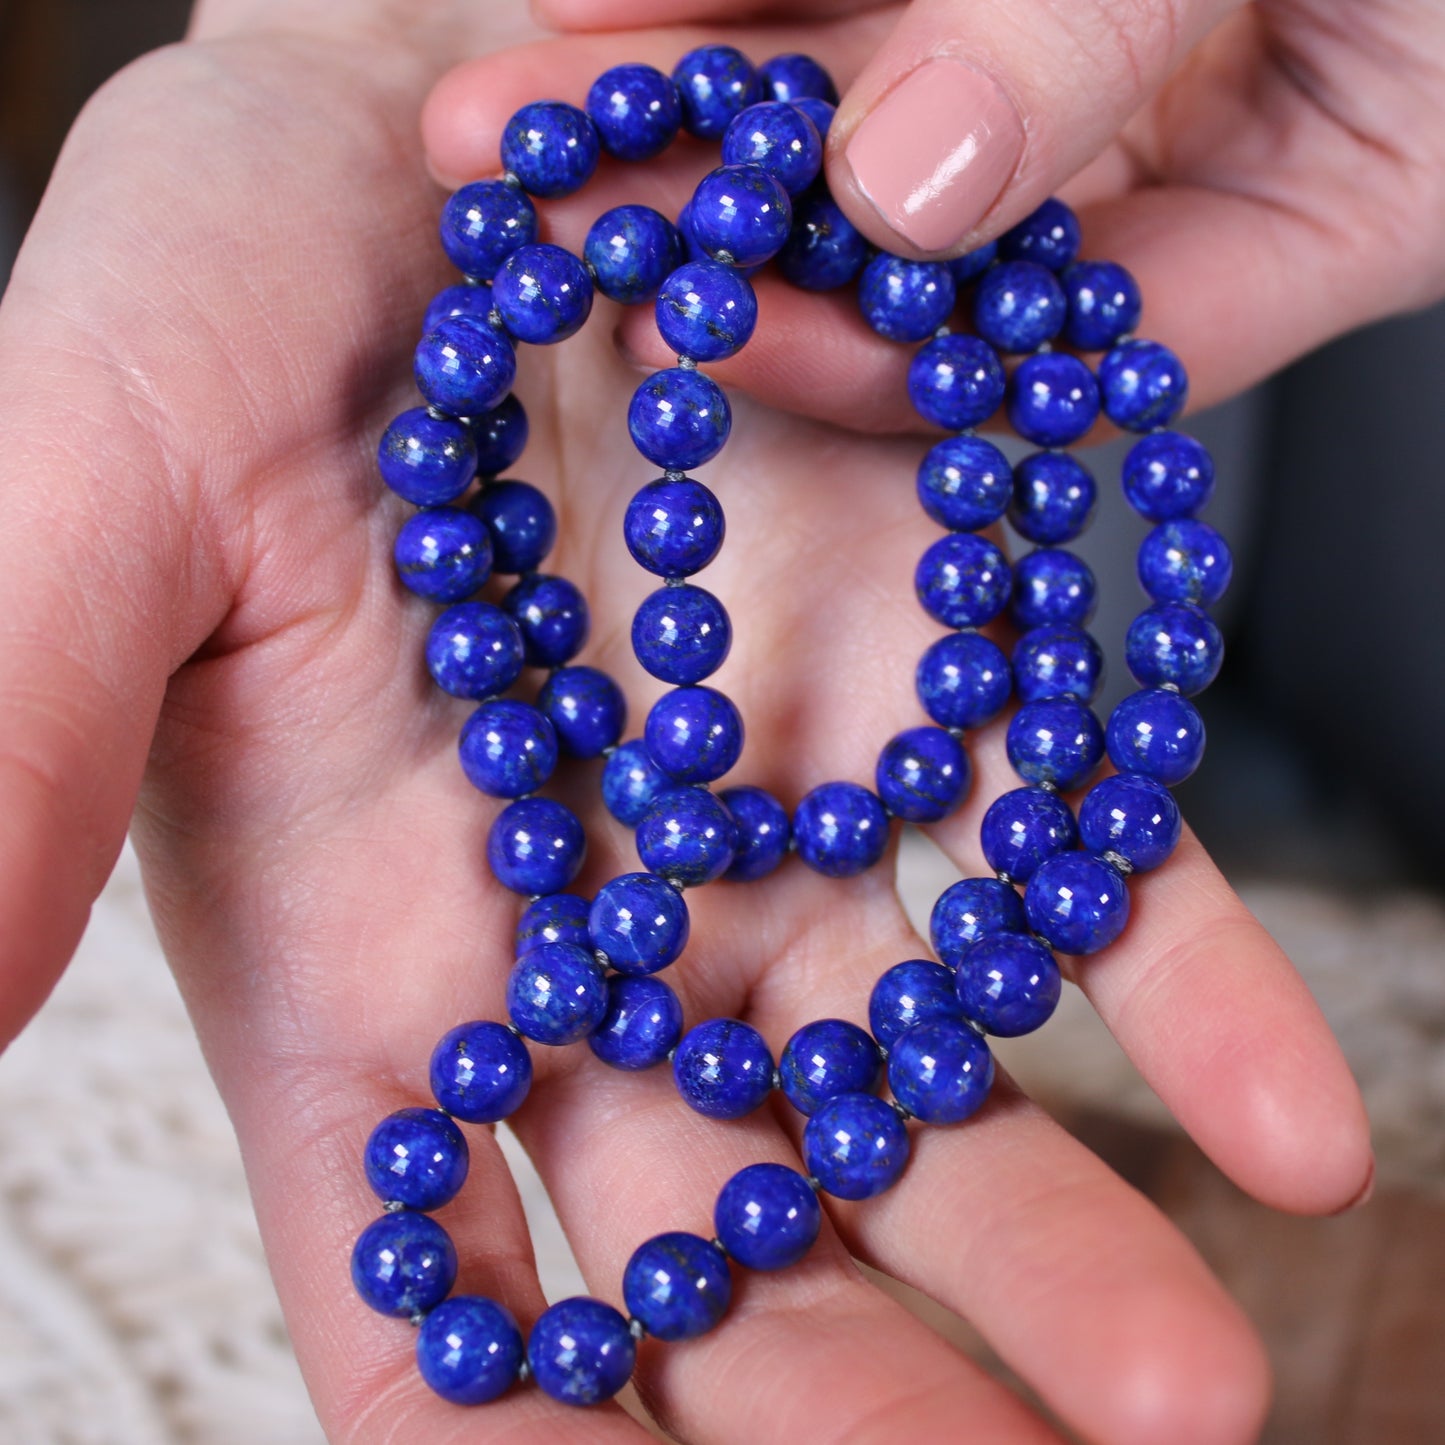 A hand holding a deep blue Crystal healing Lapis Lazuli necklace for harmonizing heart and mind 